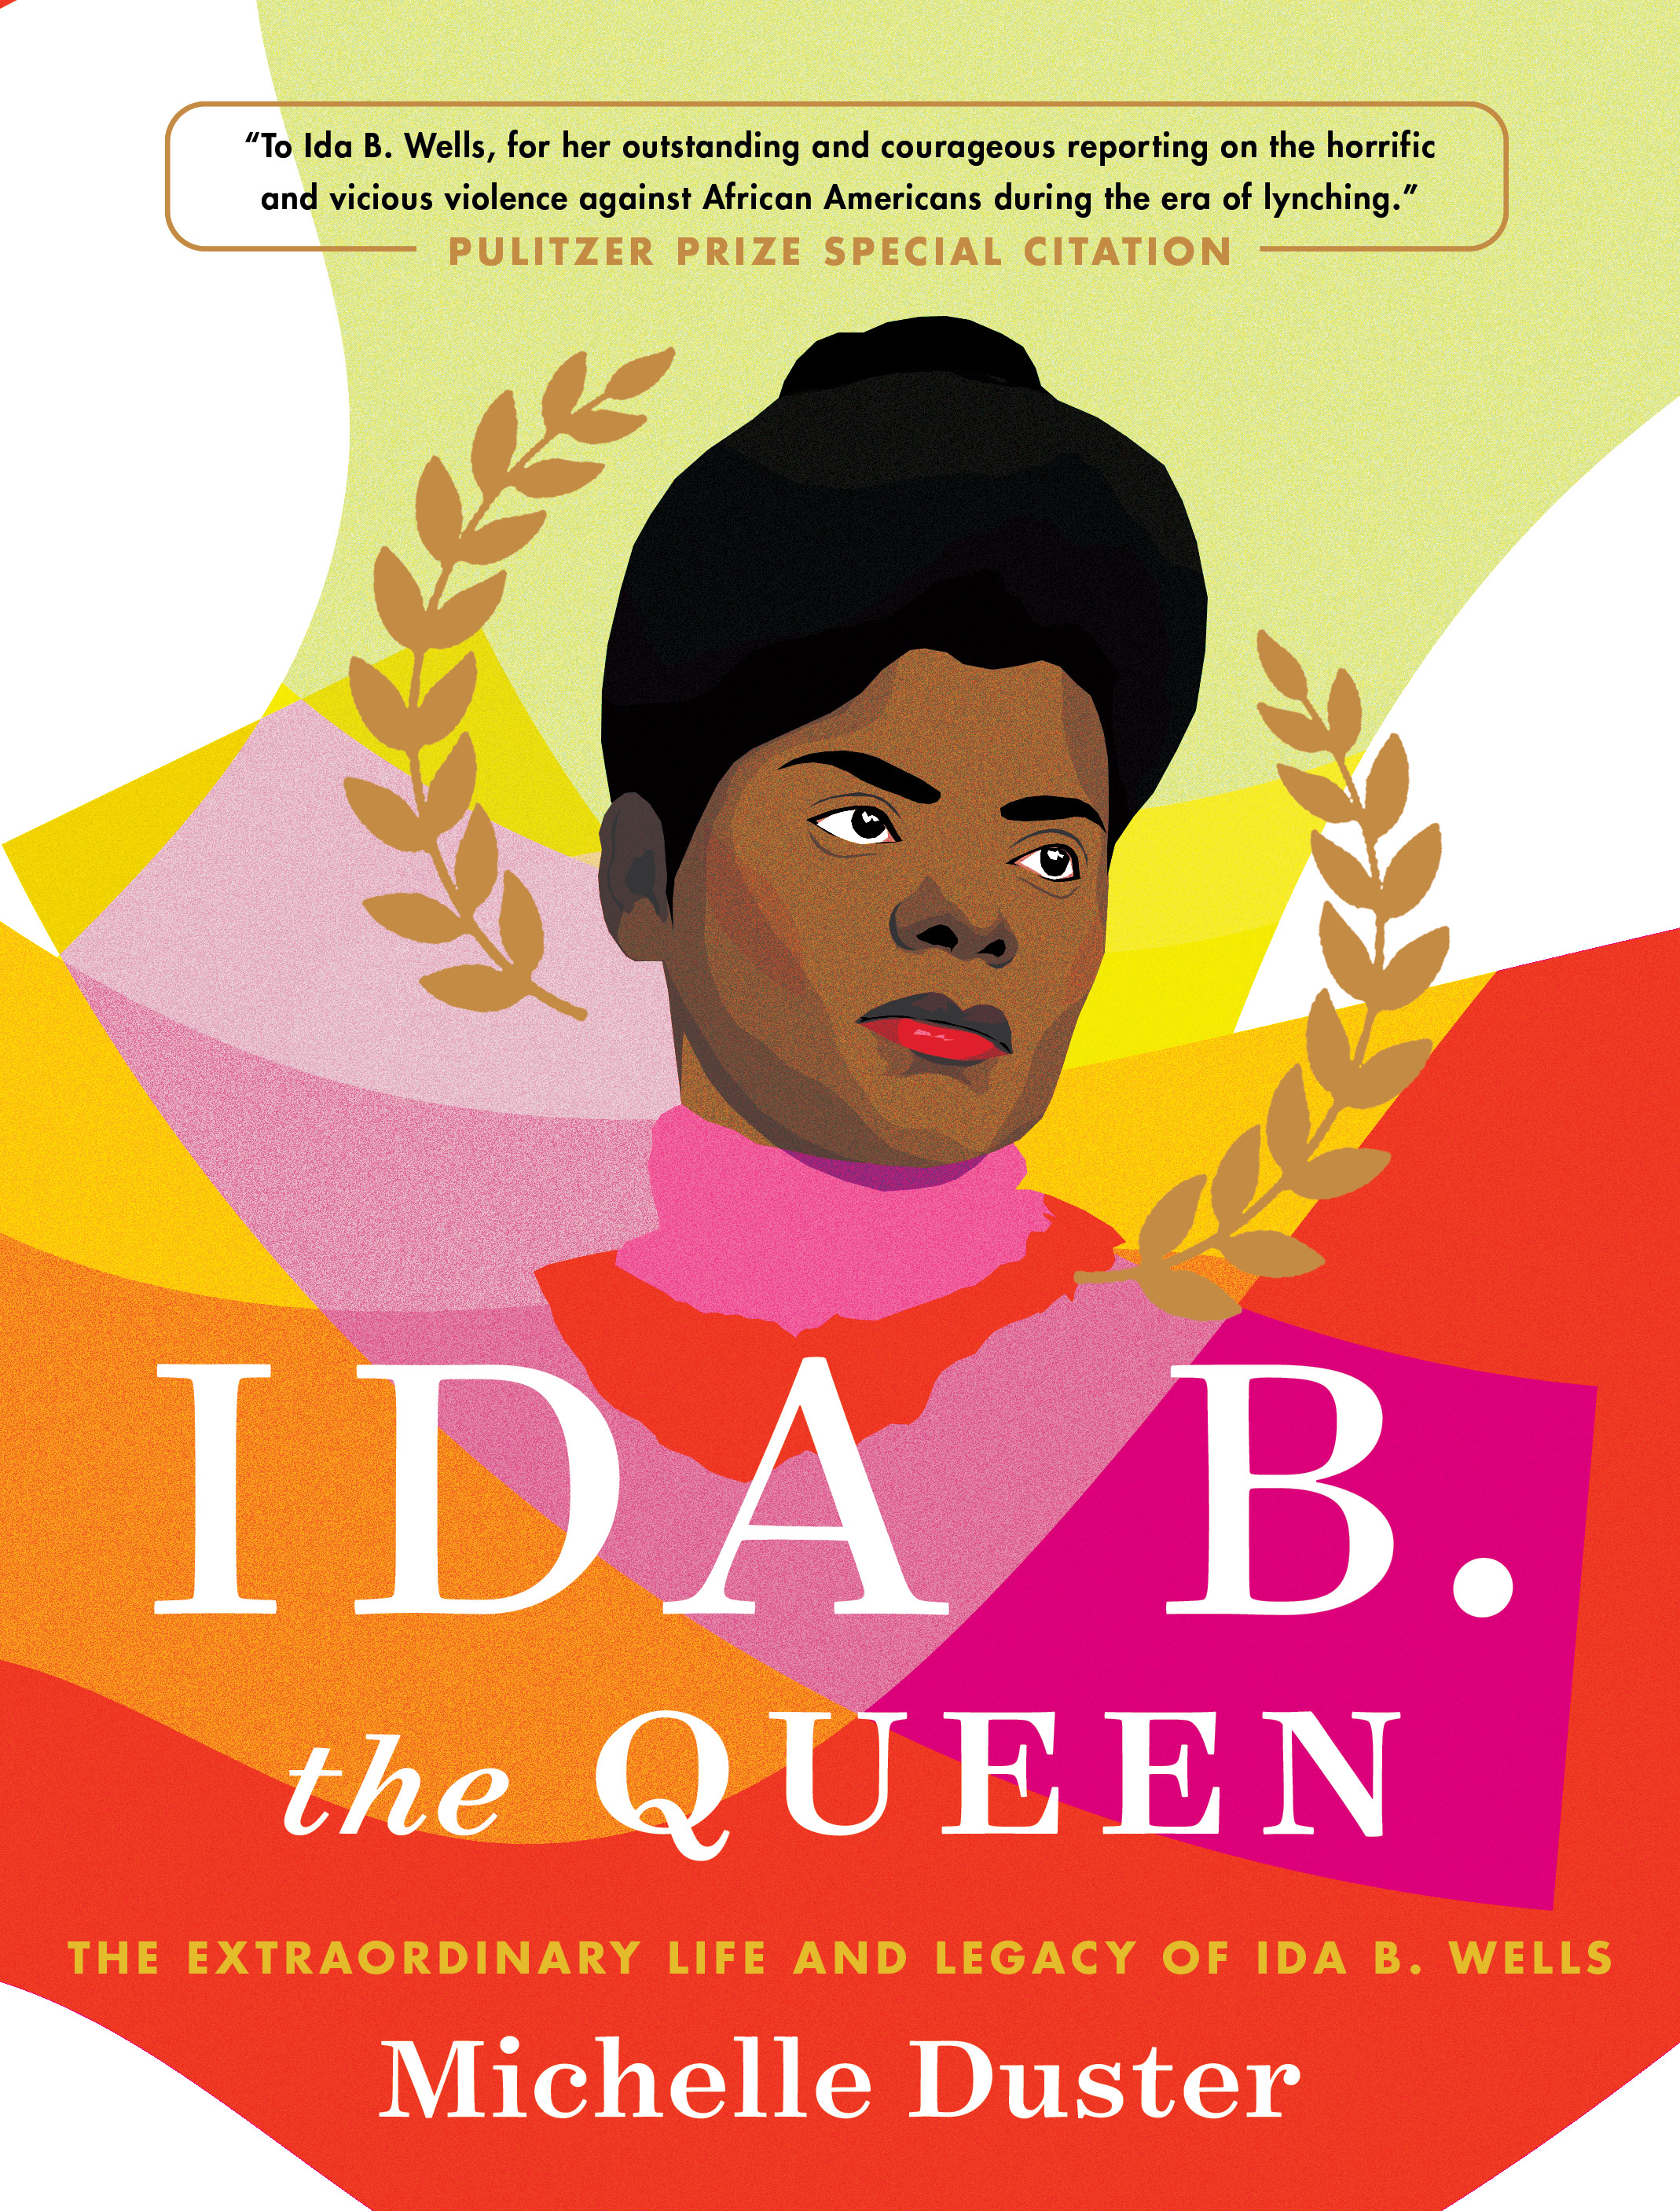 Cover art for "Ida B. The Queen: The Extraordinary Life and Legacy of Ida B. Wells."